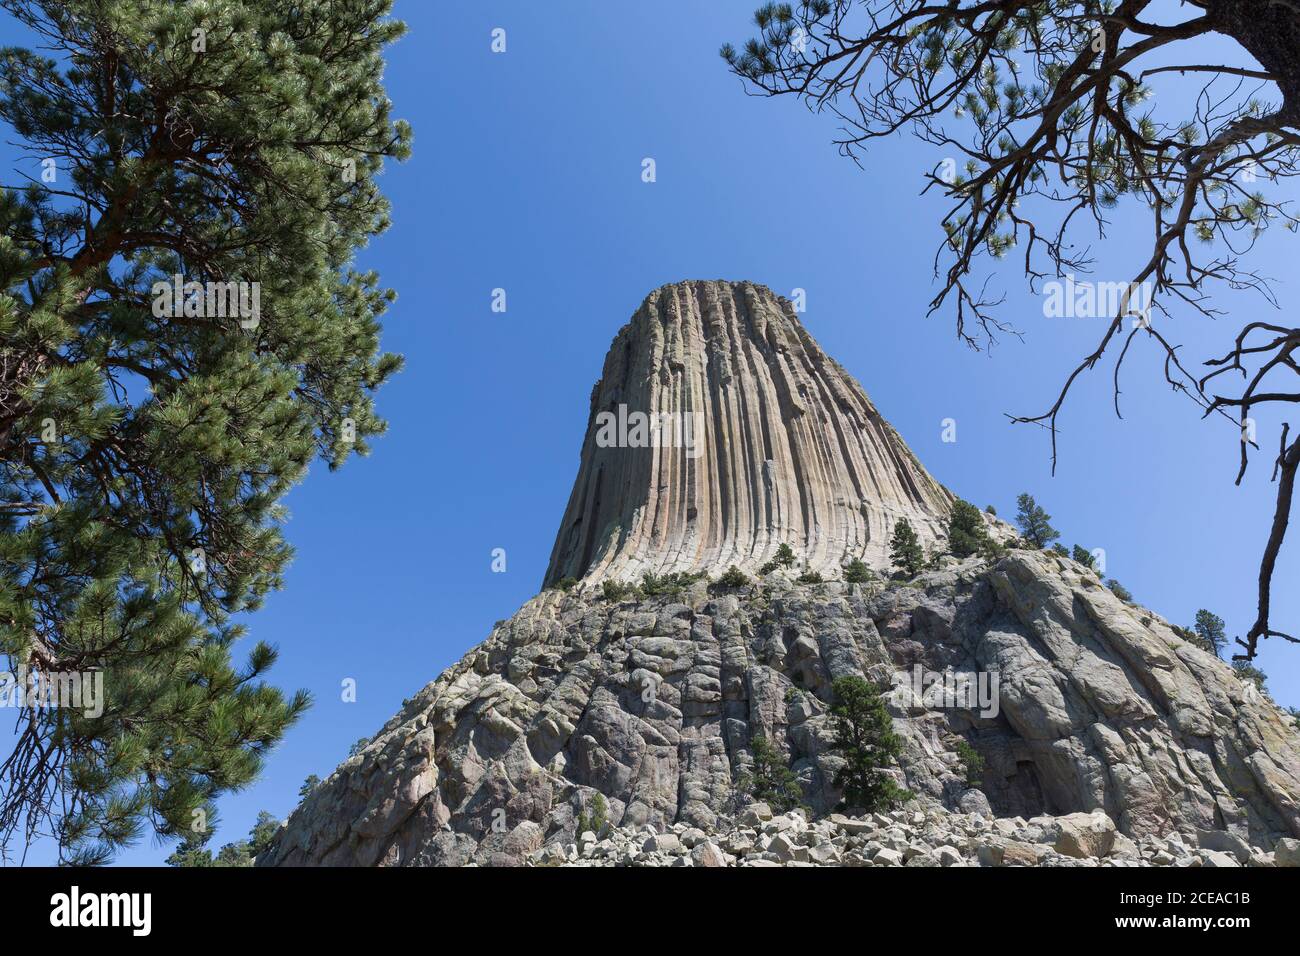 A view of the south side of the tower from Tower Trail at Devils Tower National Monument, Wyoming on Friday, August 14, 2020. Stock Photo